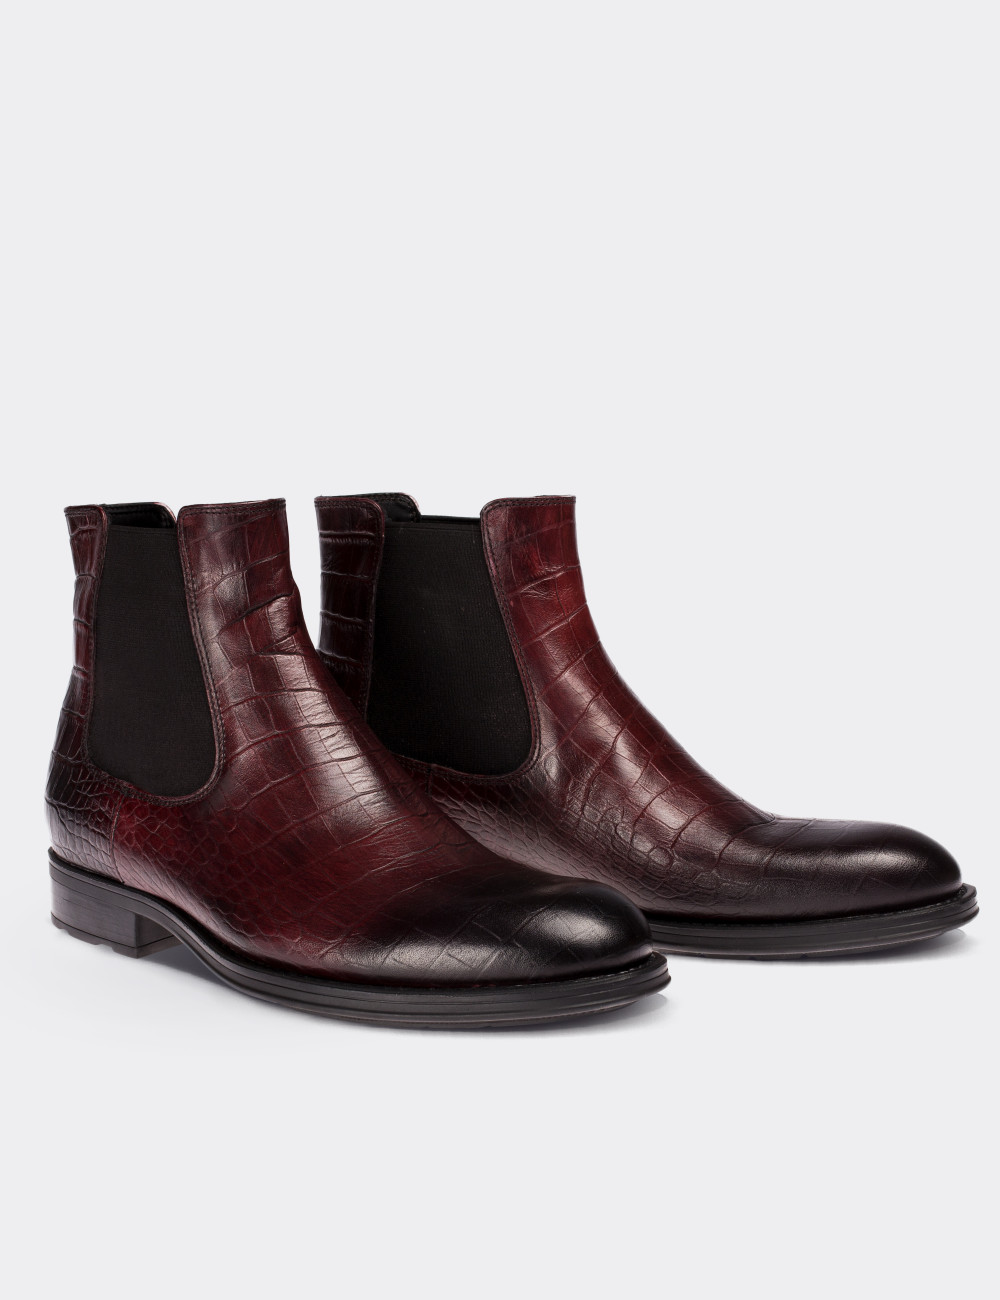 Burgundy Leather Chelsea Boots - Deery